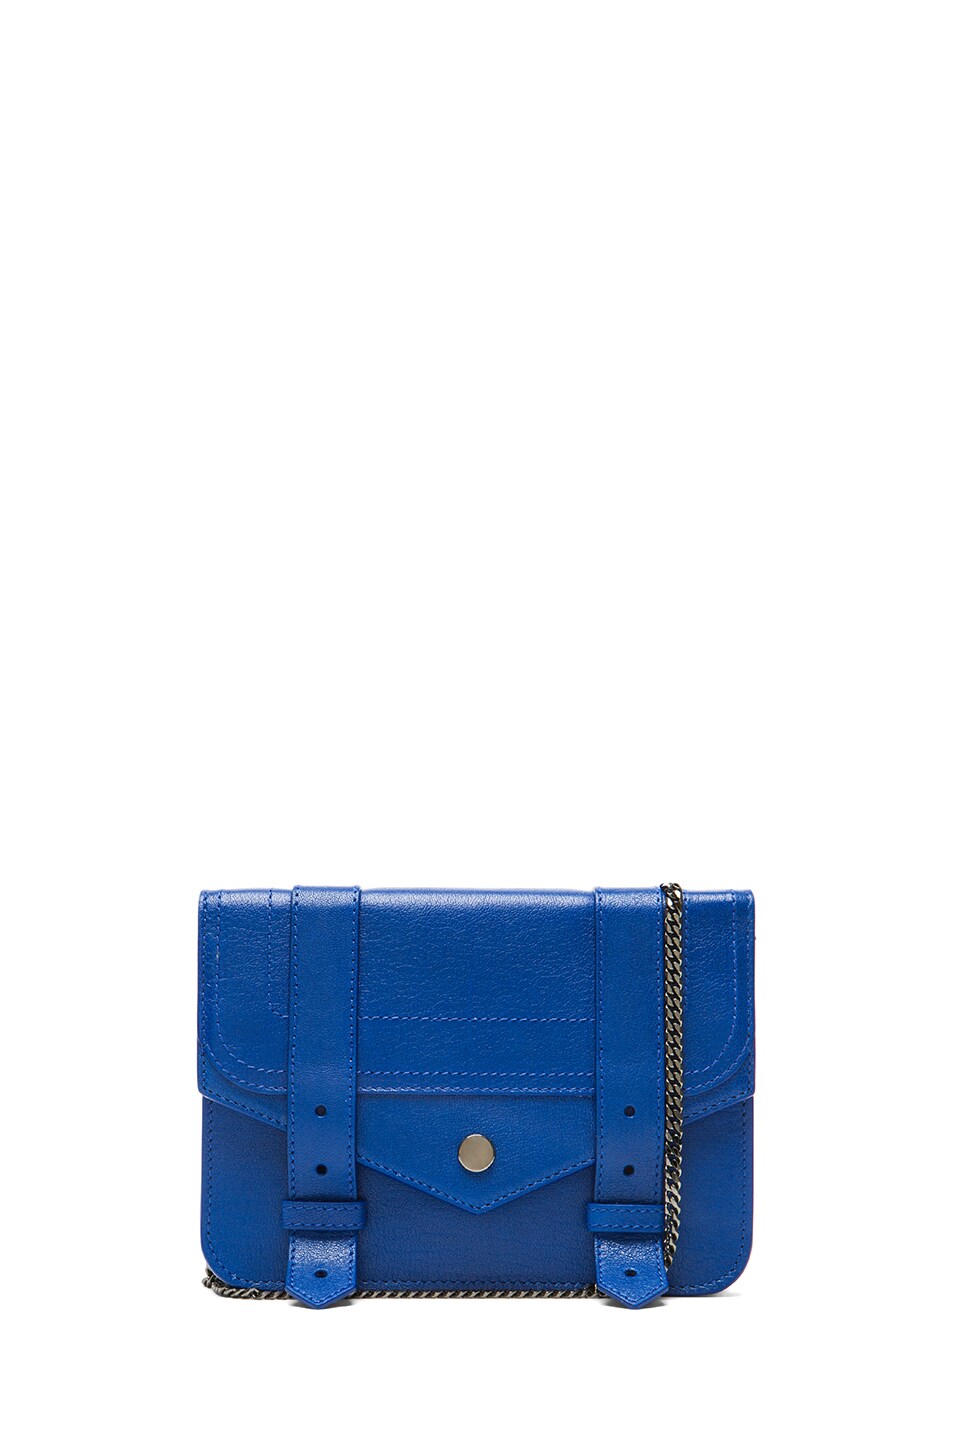 Image 1 of Proenza Schouler Large PS1 Chain Wallet in Royal Blue